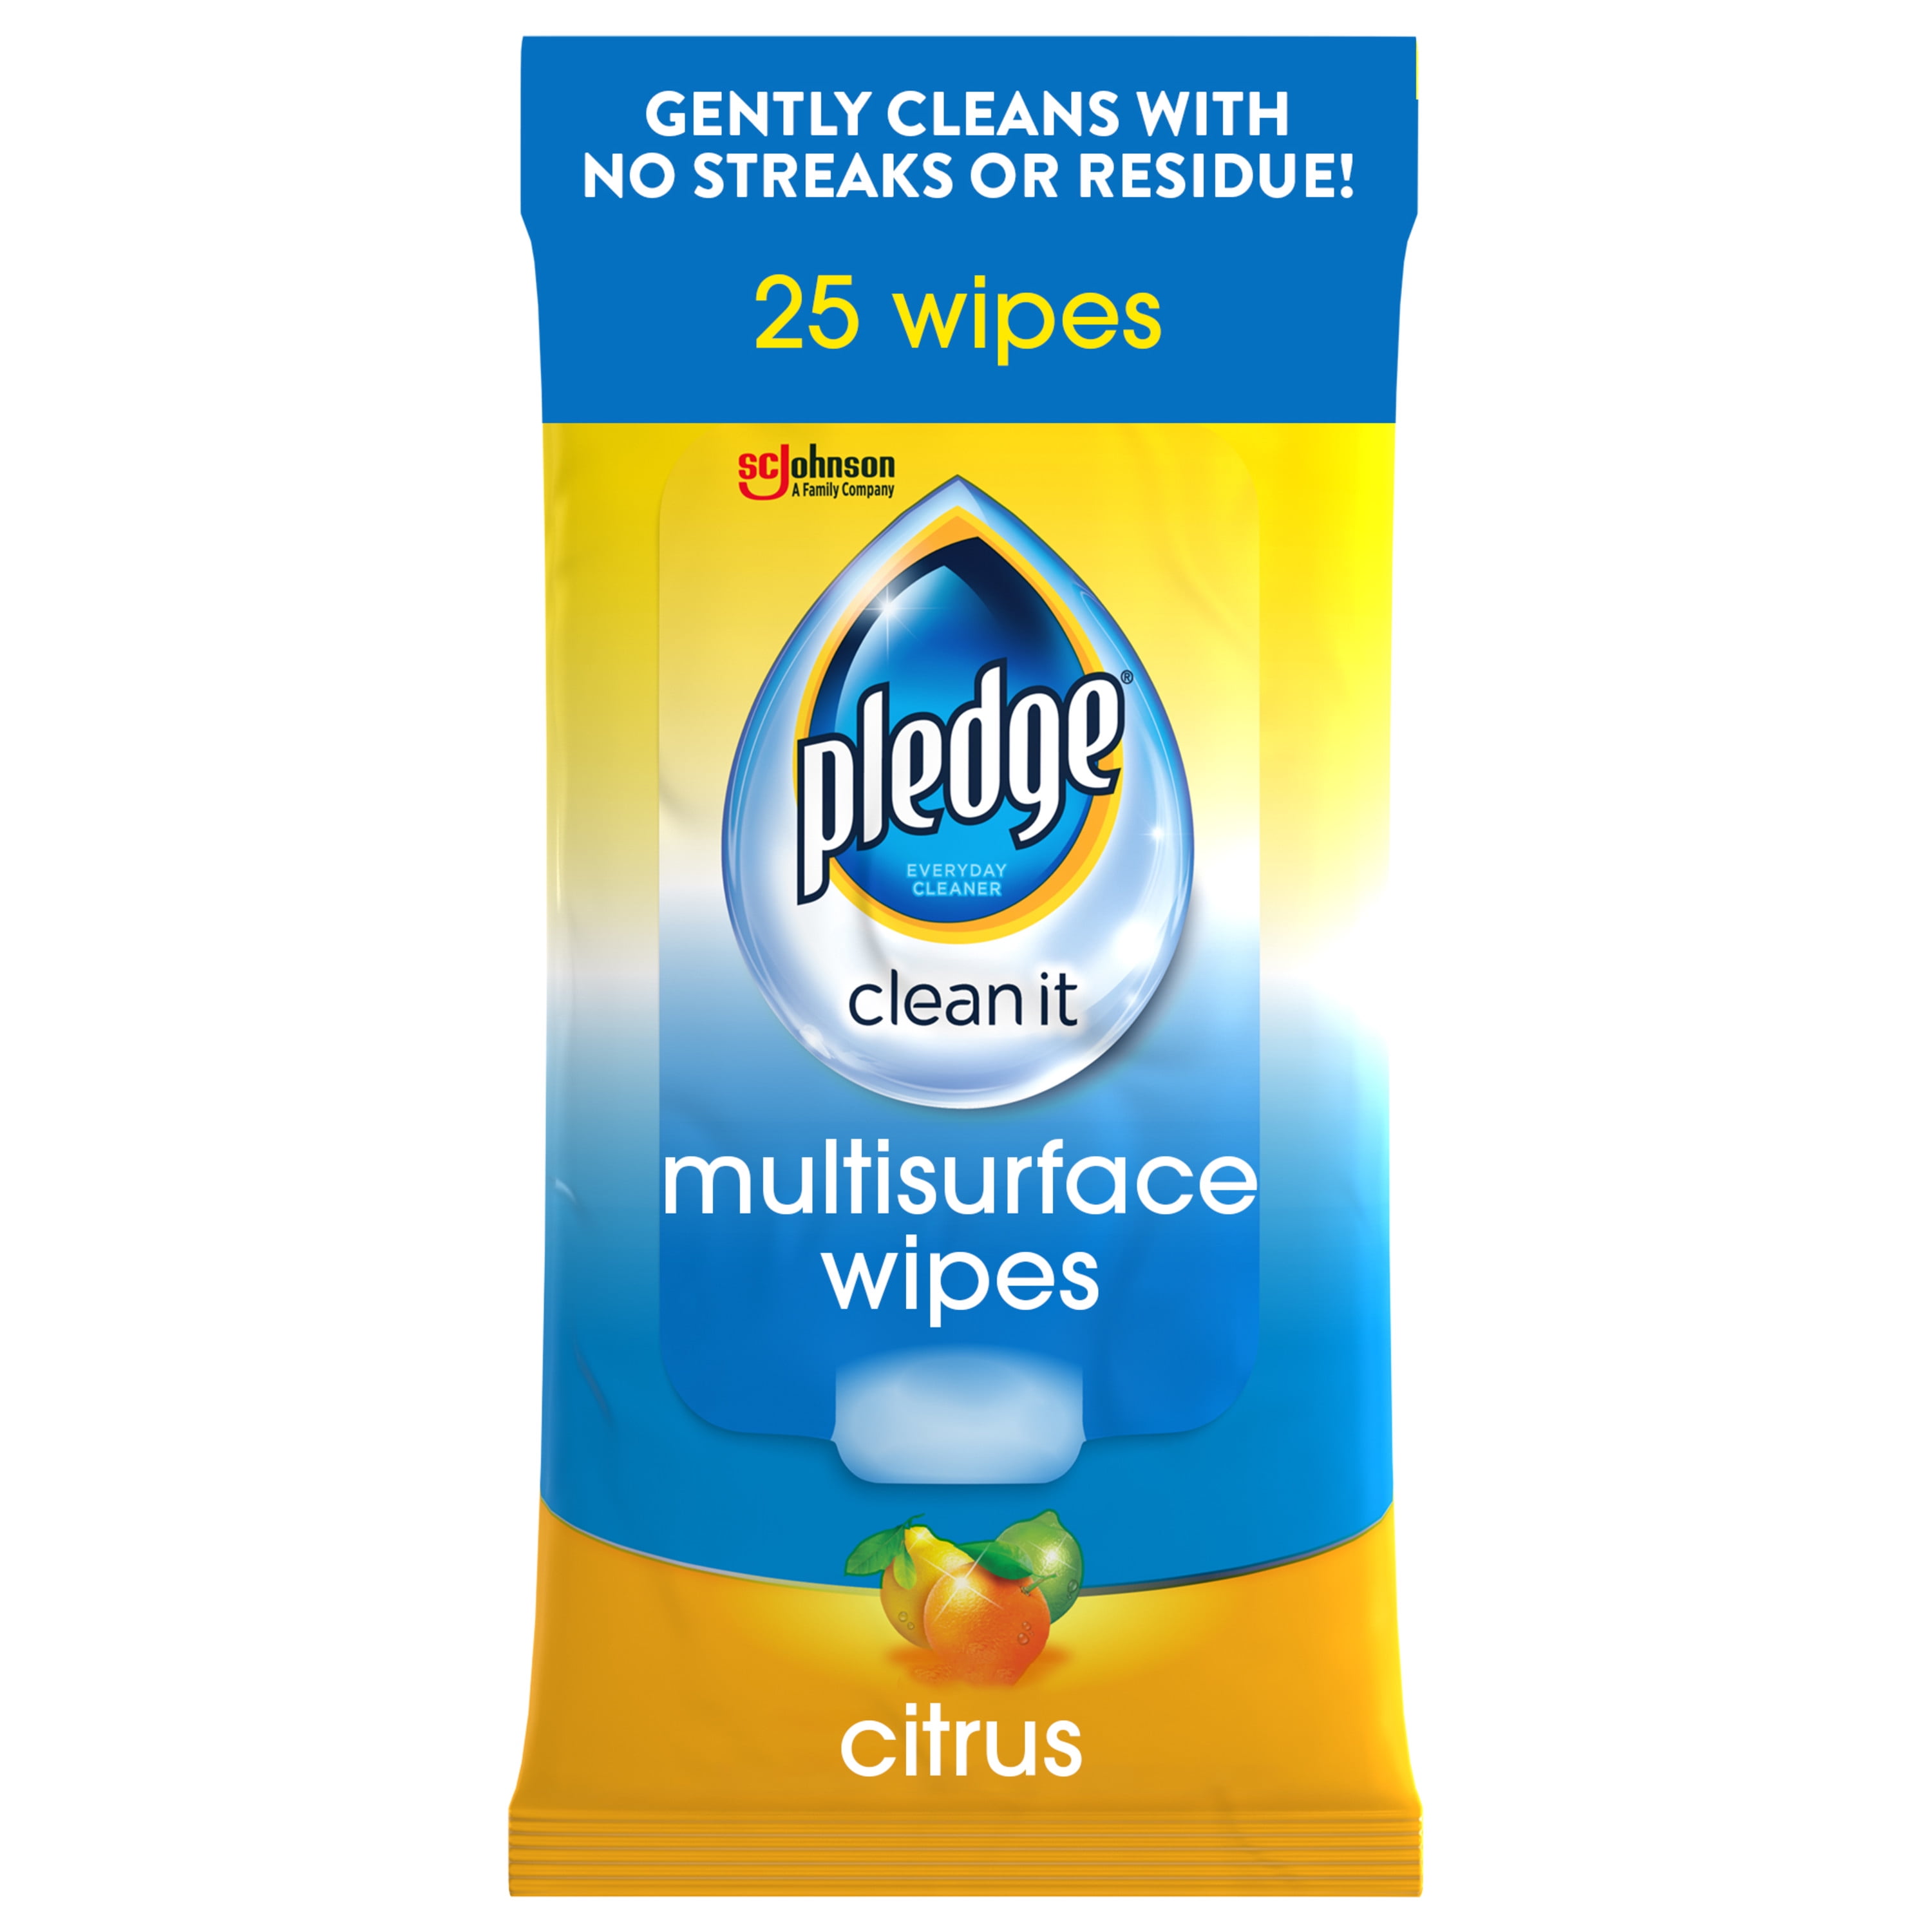 Pledge Multisurface Wipes, Everyday Clean, Fresh Citrus Scent, 25 PC